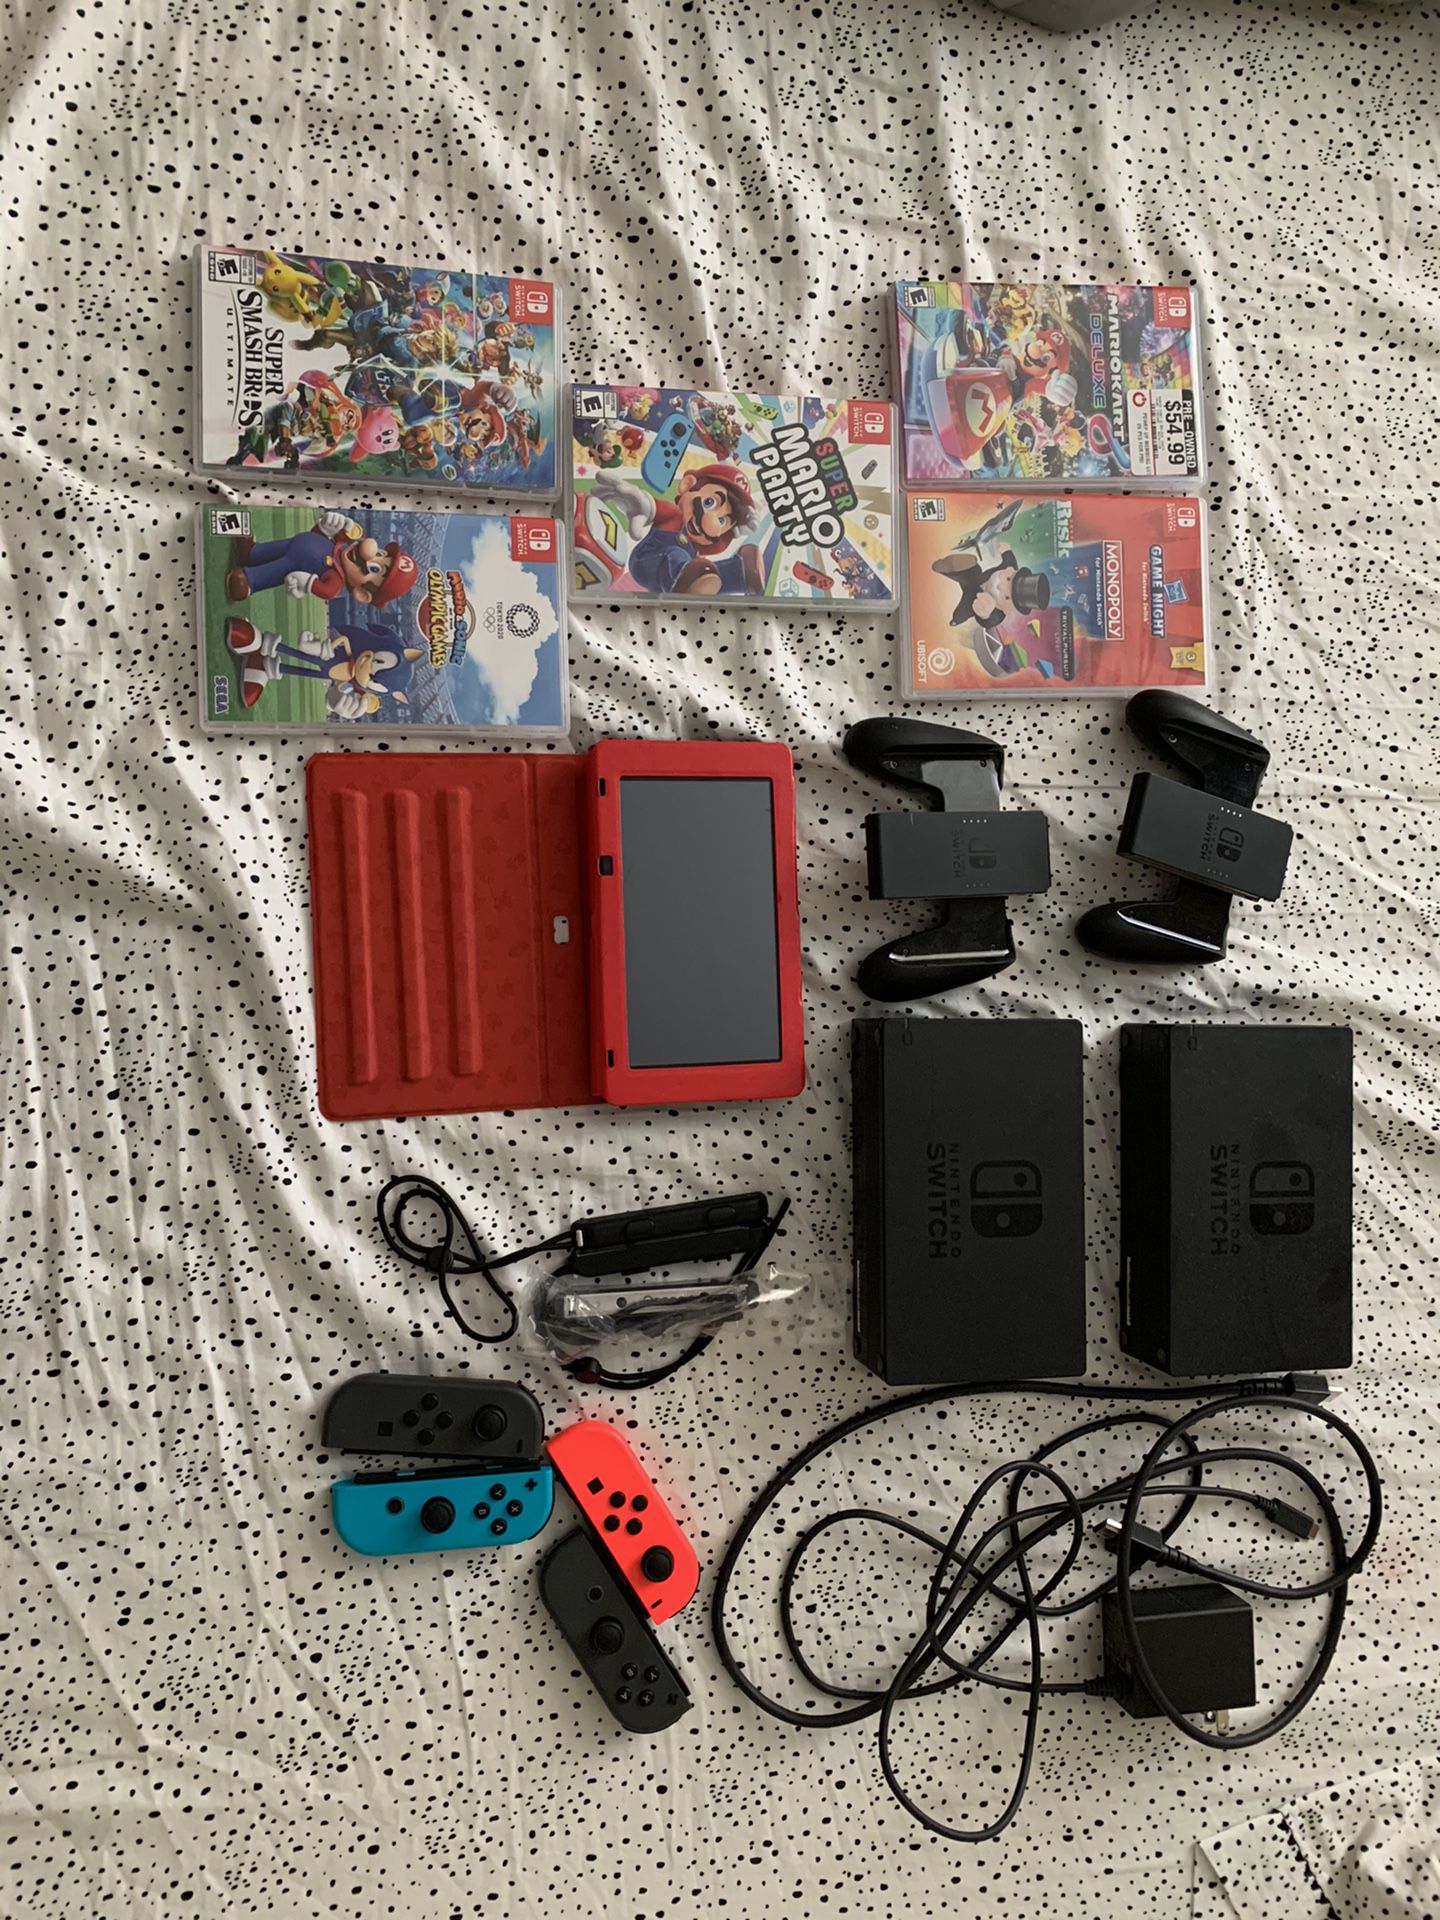 Nintendo Switch trading for PS5 OBO